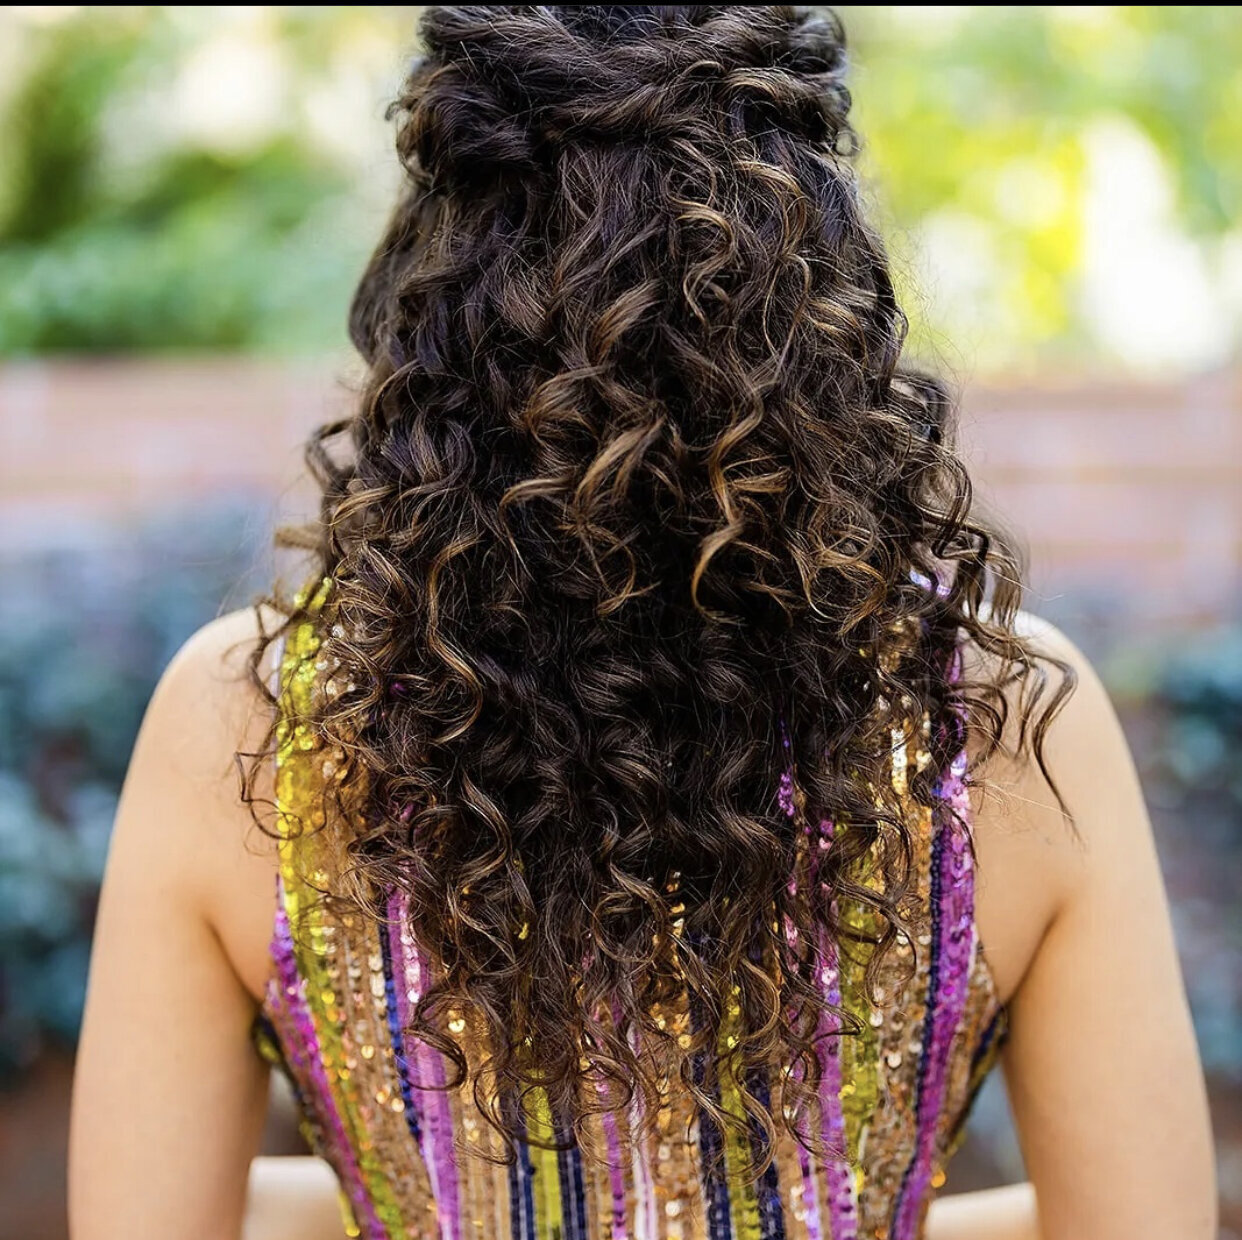 A close up of a woman's hair do.